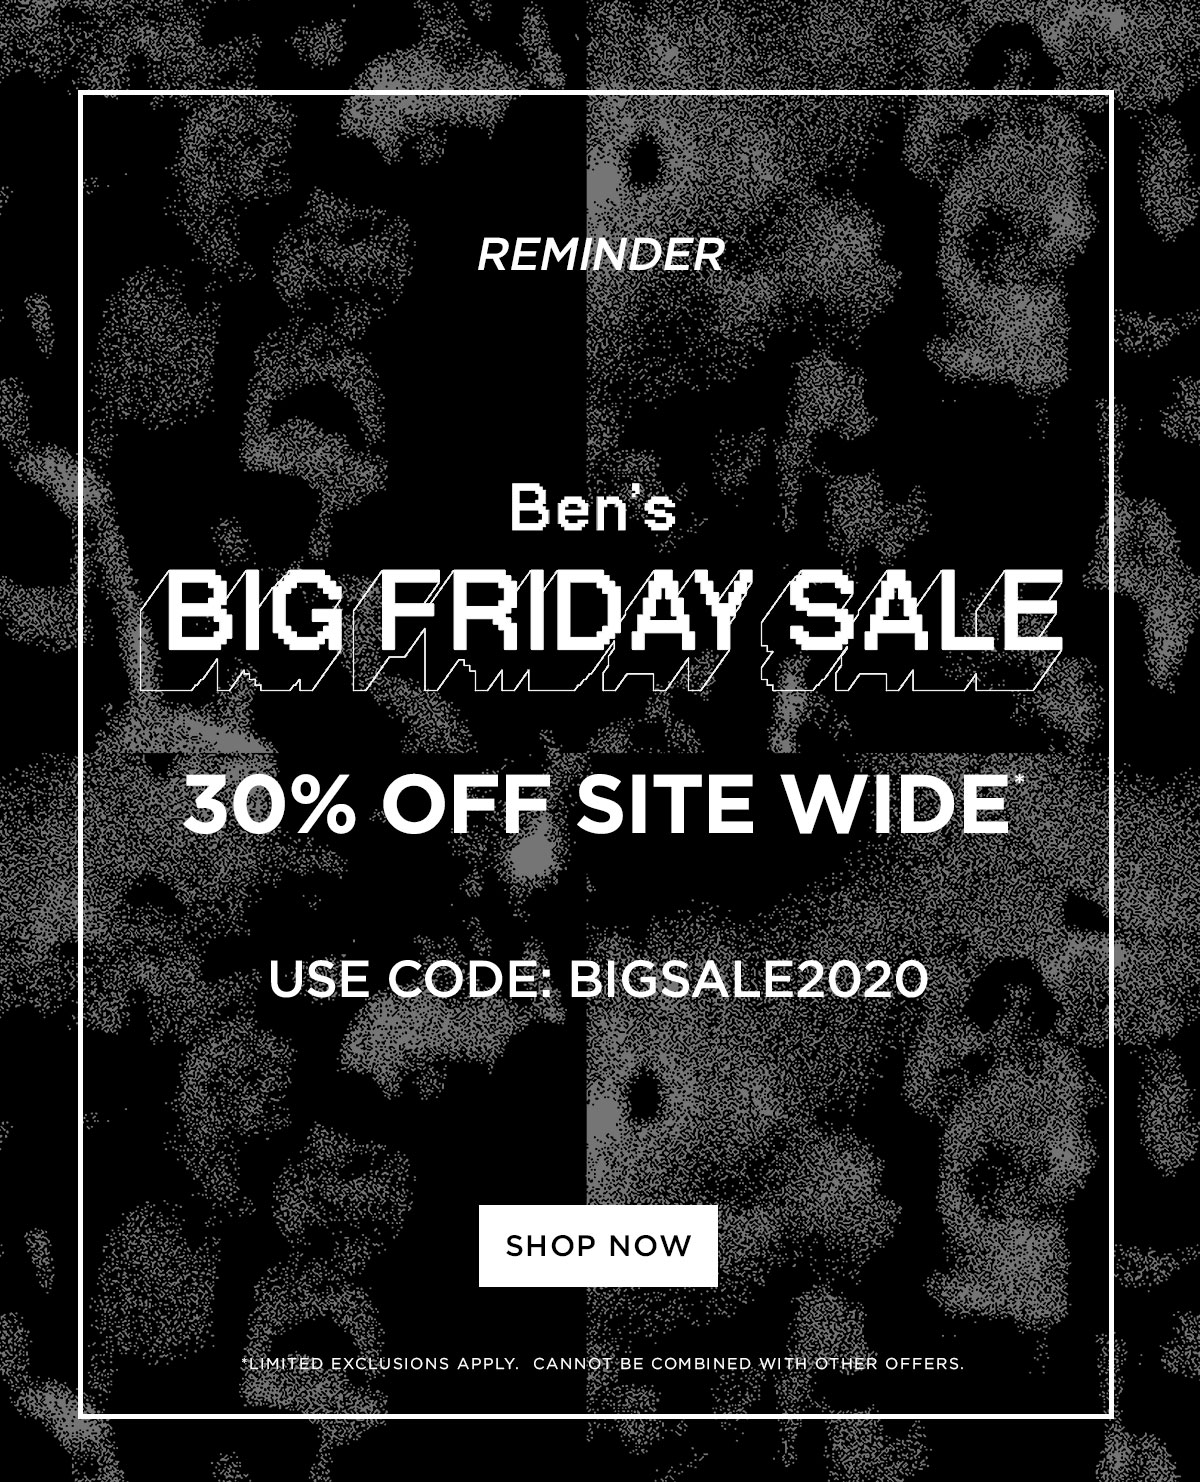 Reminder: Ben''s Big Friday Sale | 30% Off Site Wide | Use Code BIGSALE2020 | Shop Now | Limited exclusions apply. Cannot be combined with other offers.